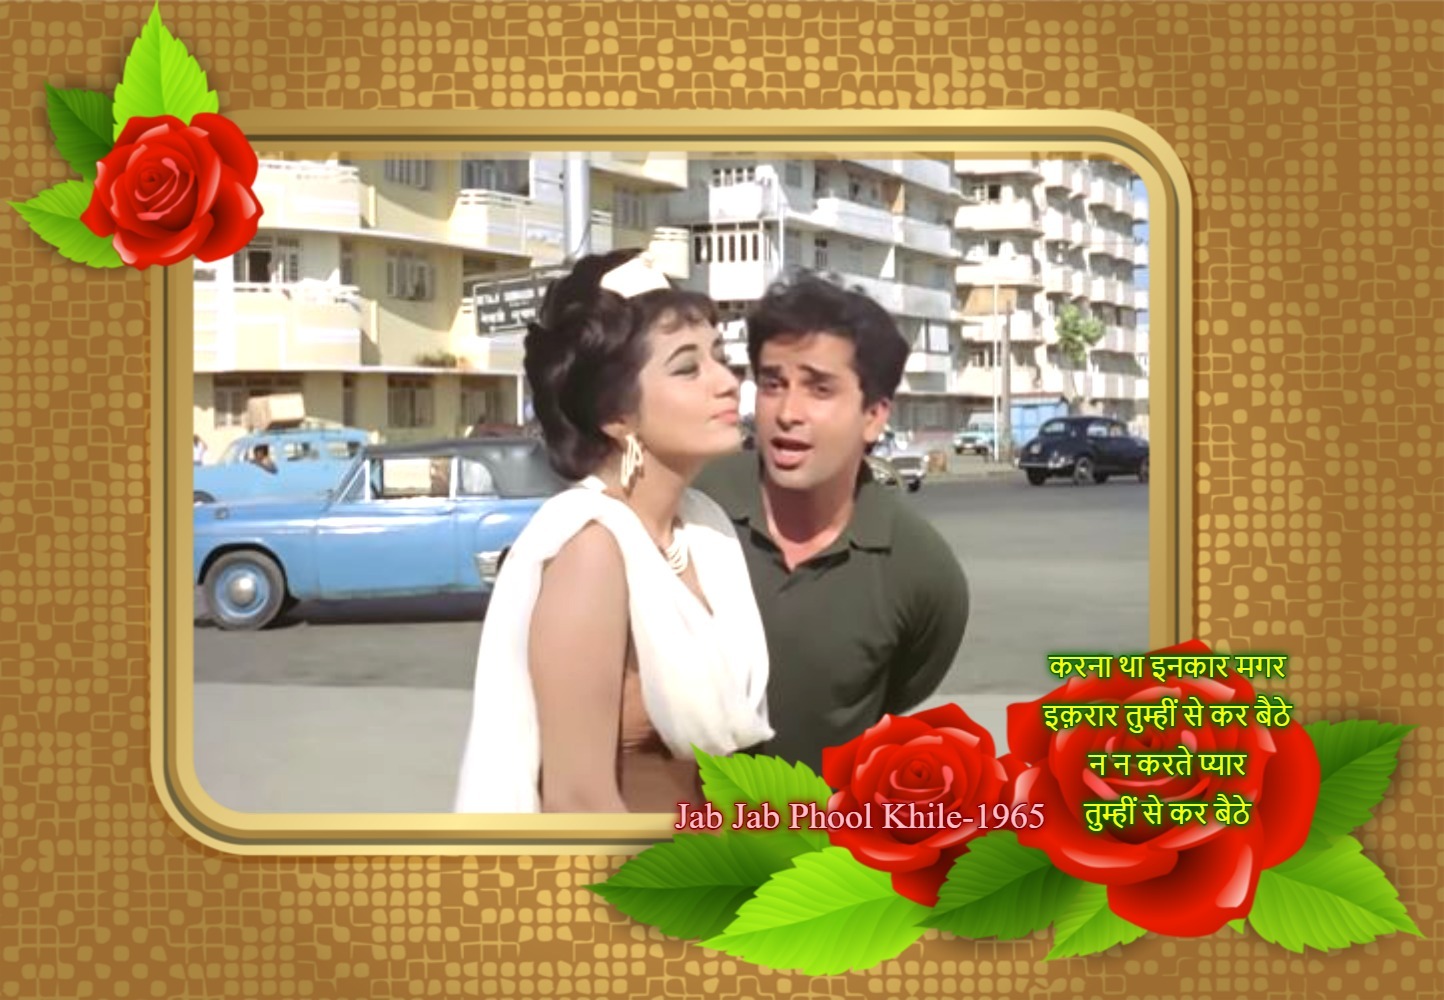 You are currently viewing “Enjoyed Wonderful Chemistry With Mohammad Rafi”